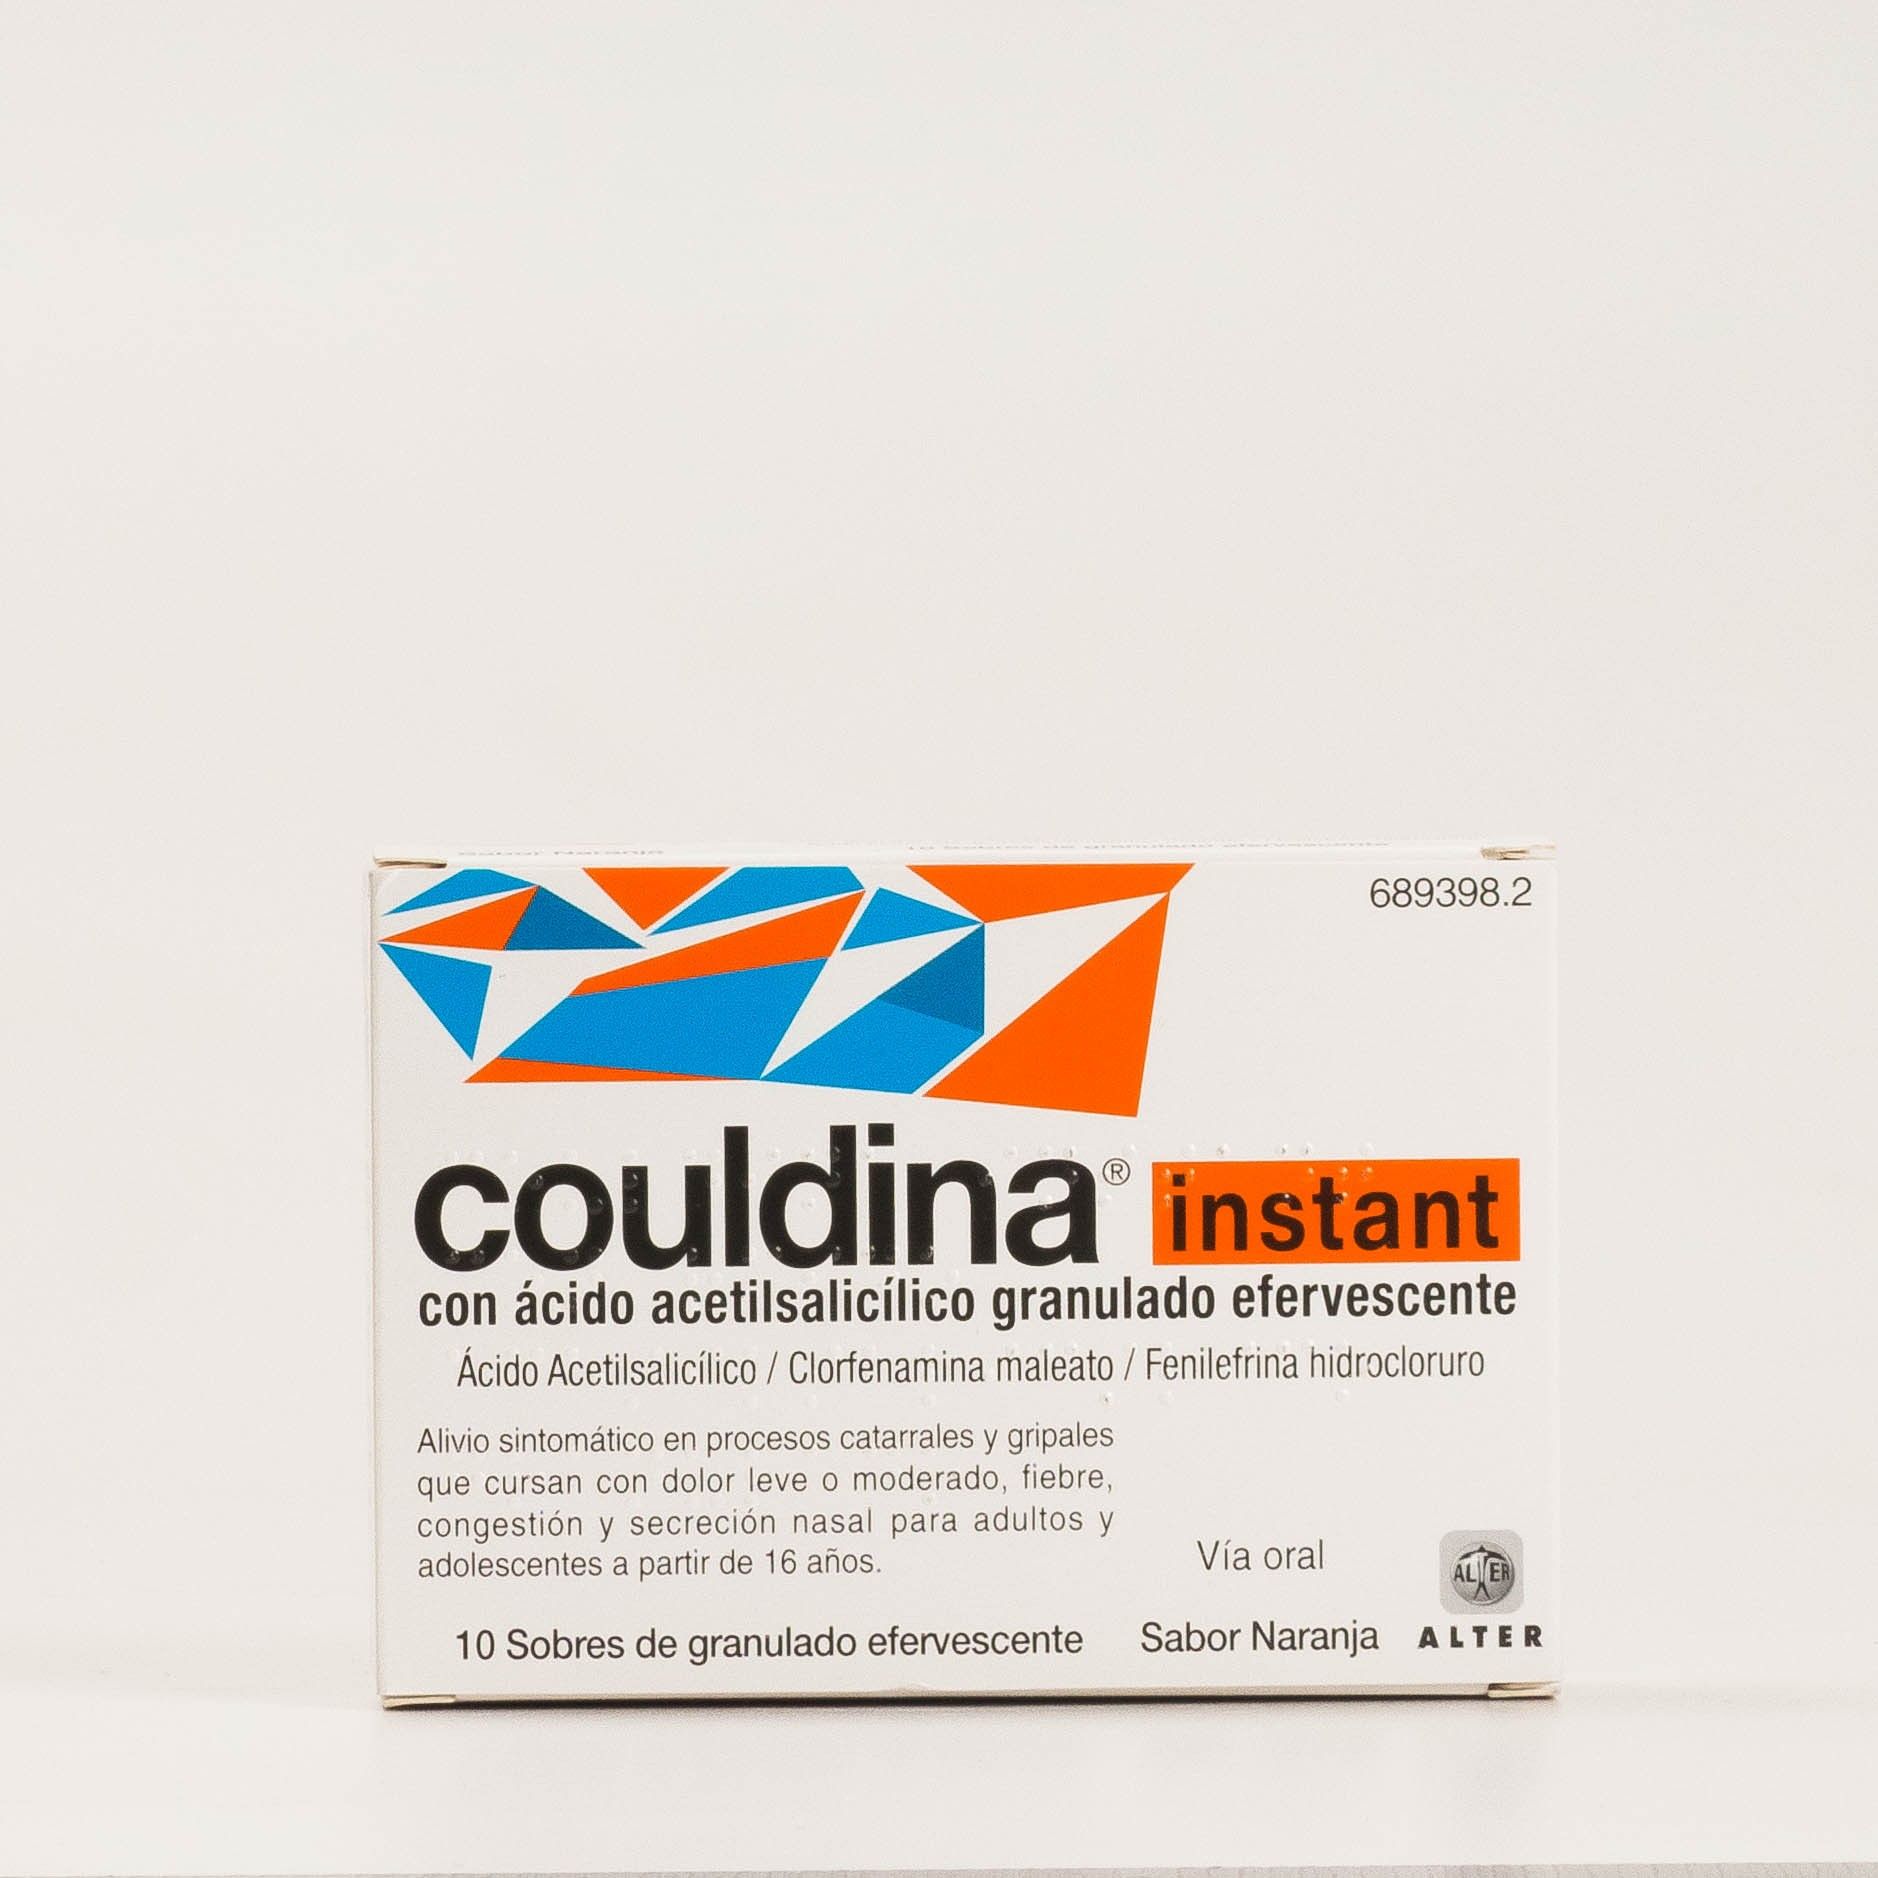 Couldina instant